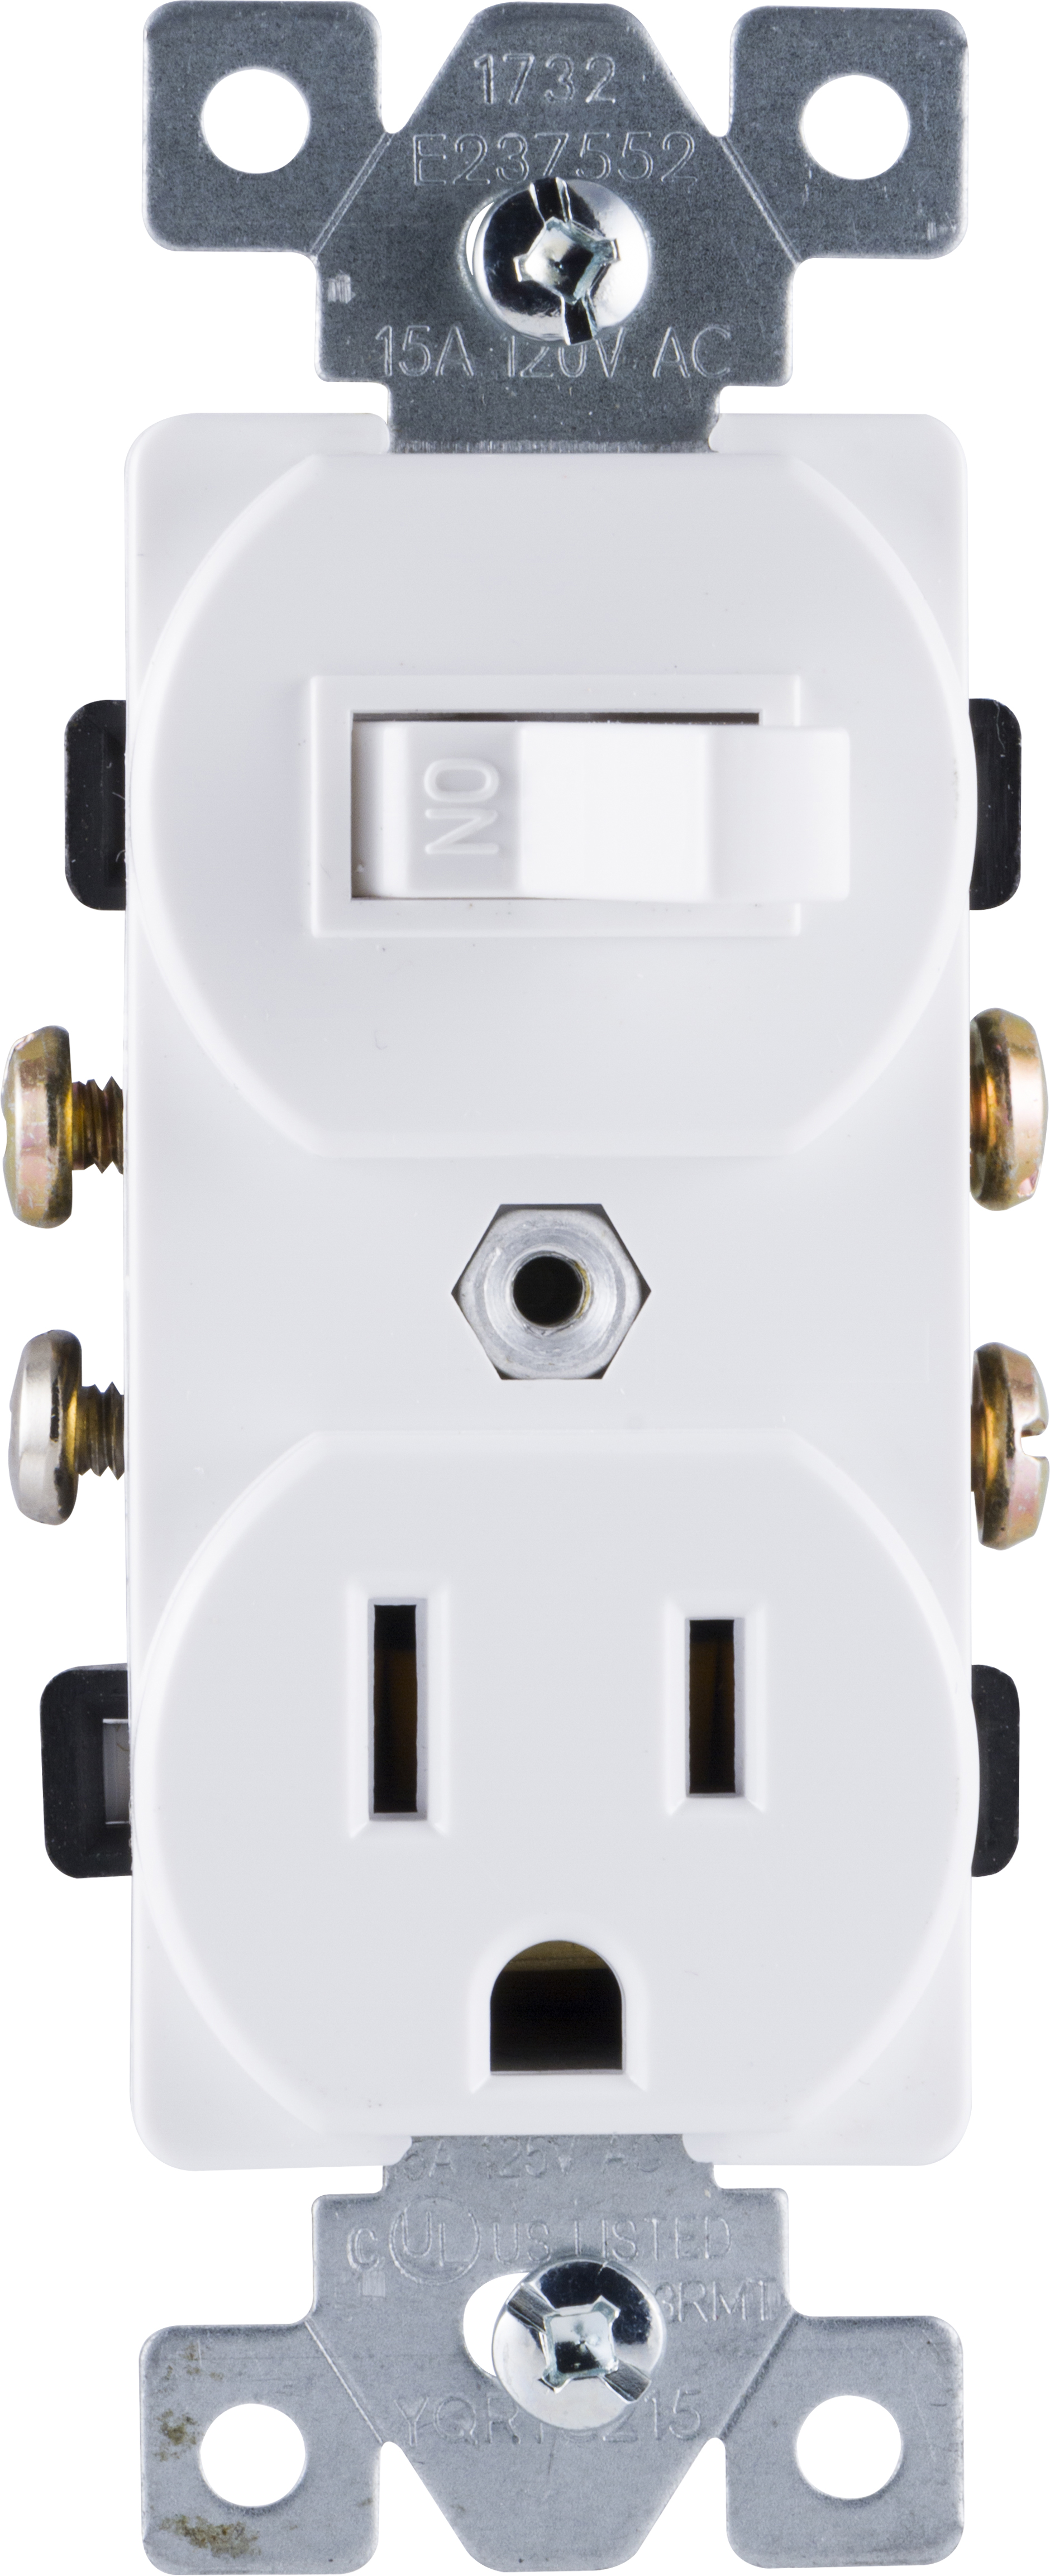 GE Wall Switch Outlet - 59797 - image 3 of 6